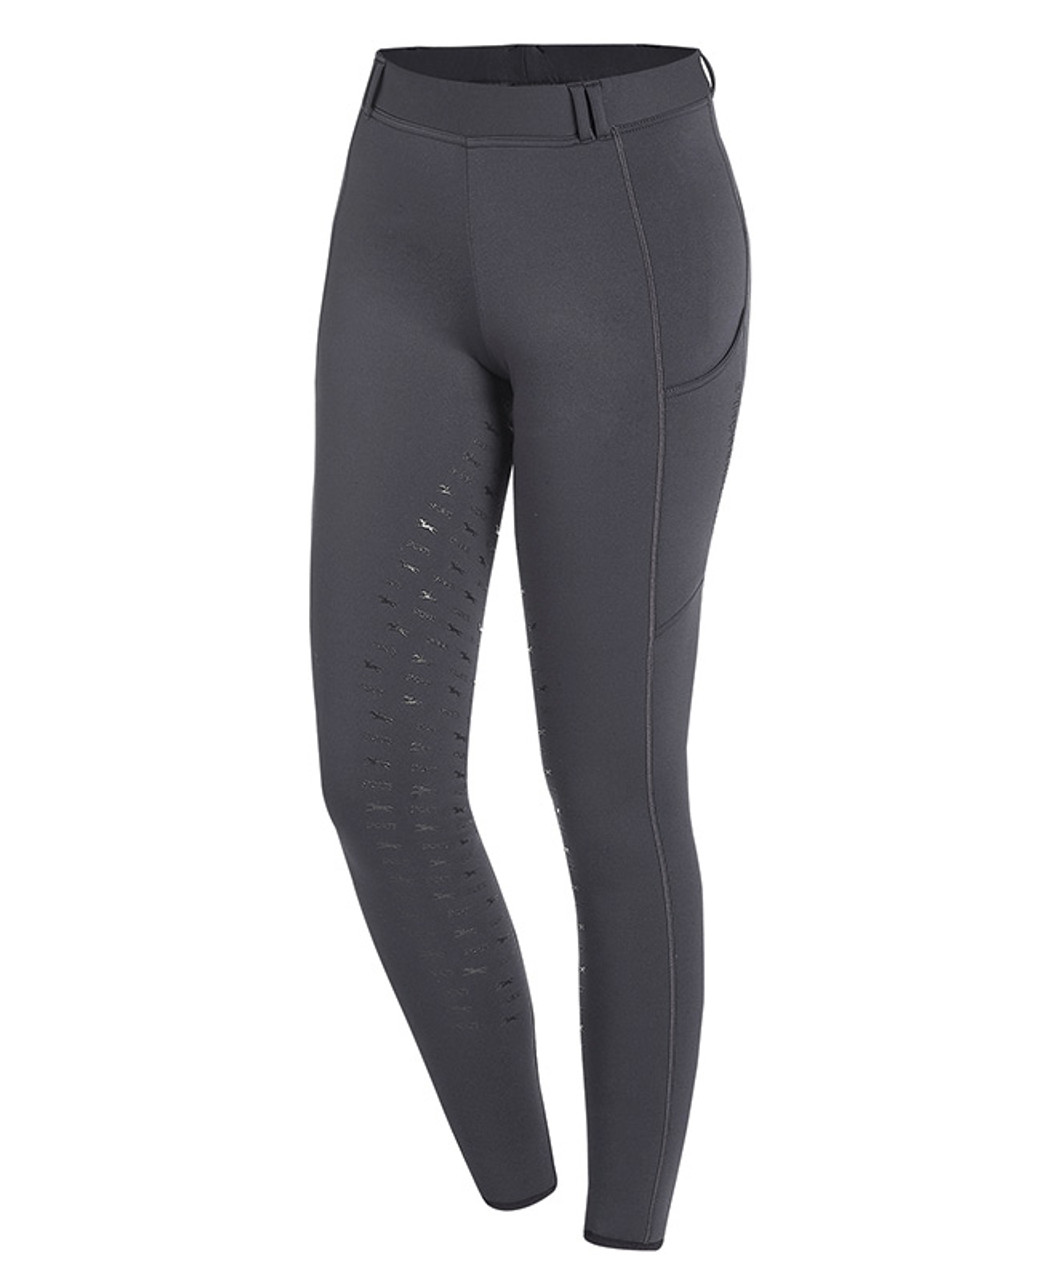 CLEAROUT - Schockemohle Ladies Winter Riding Tights II